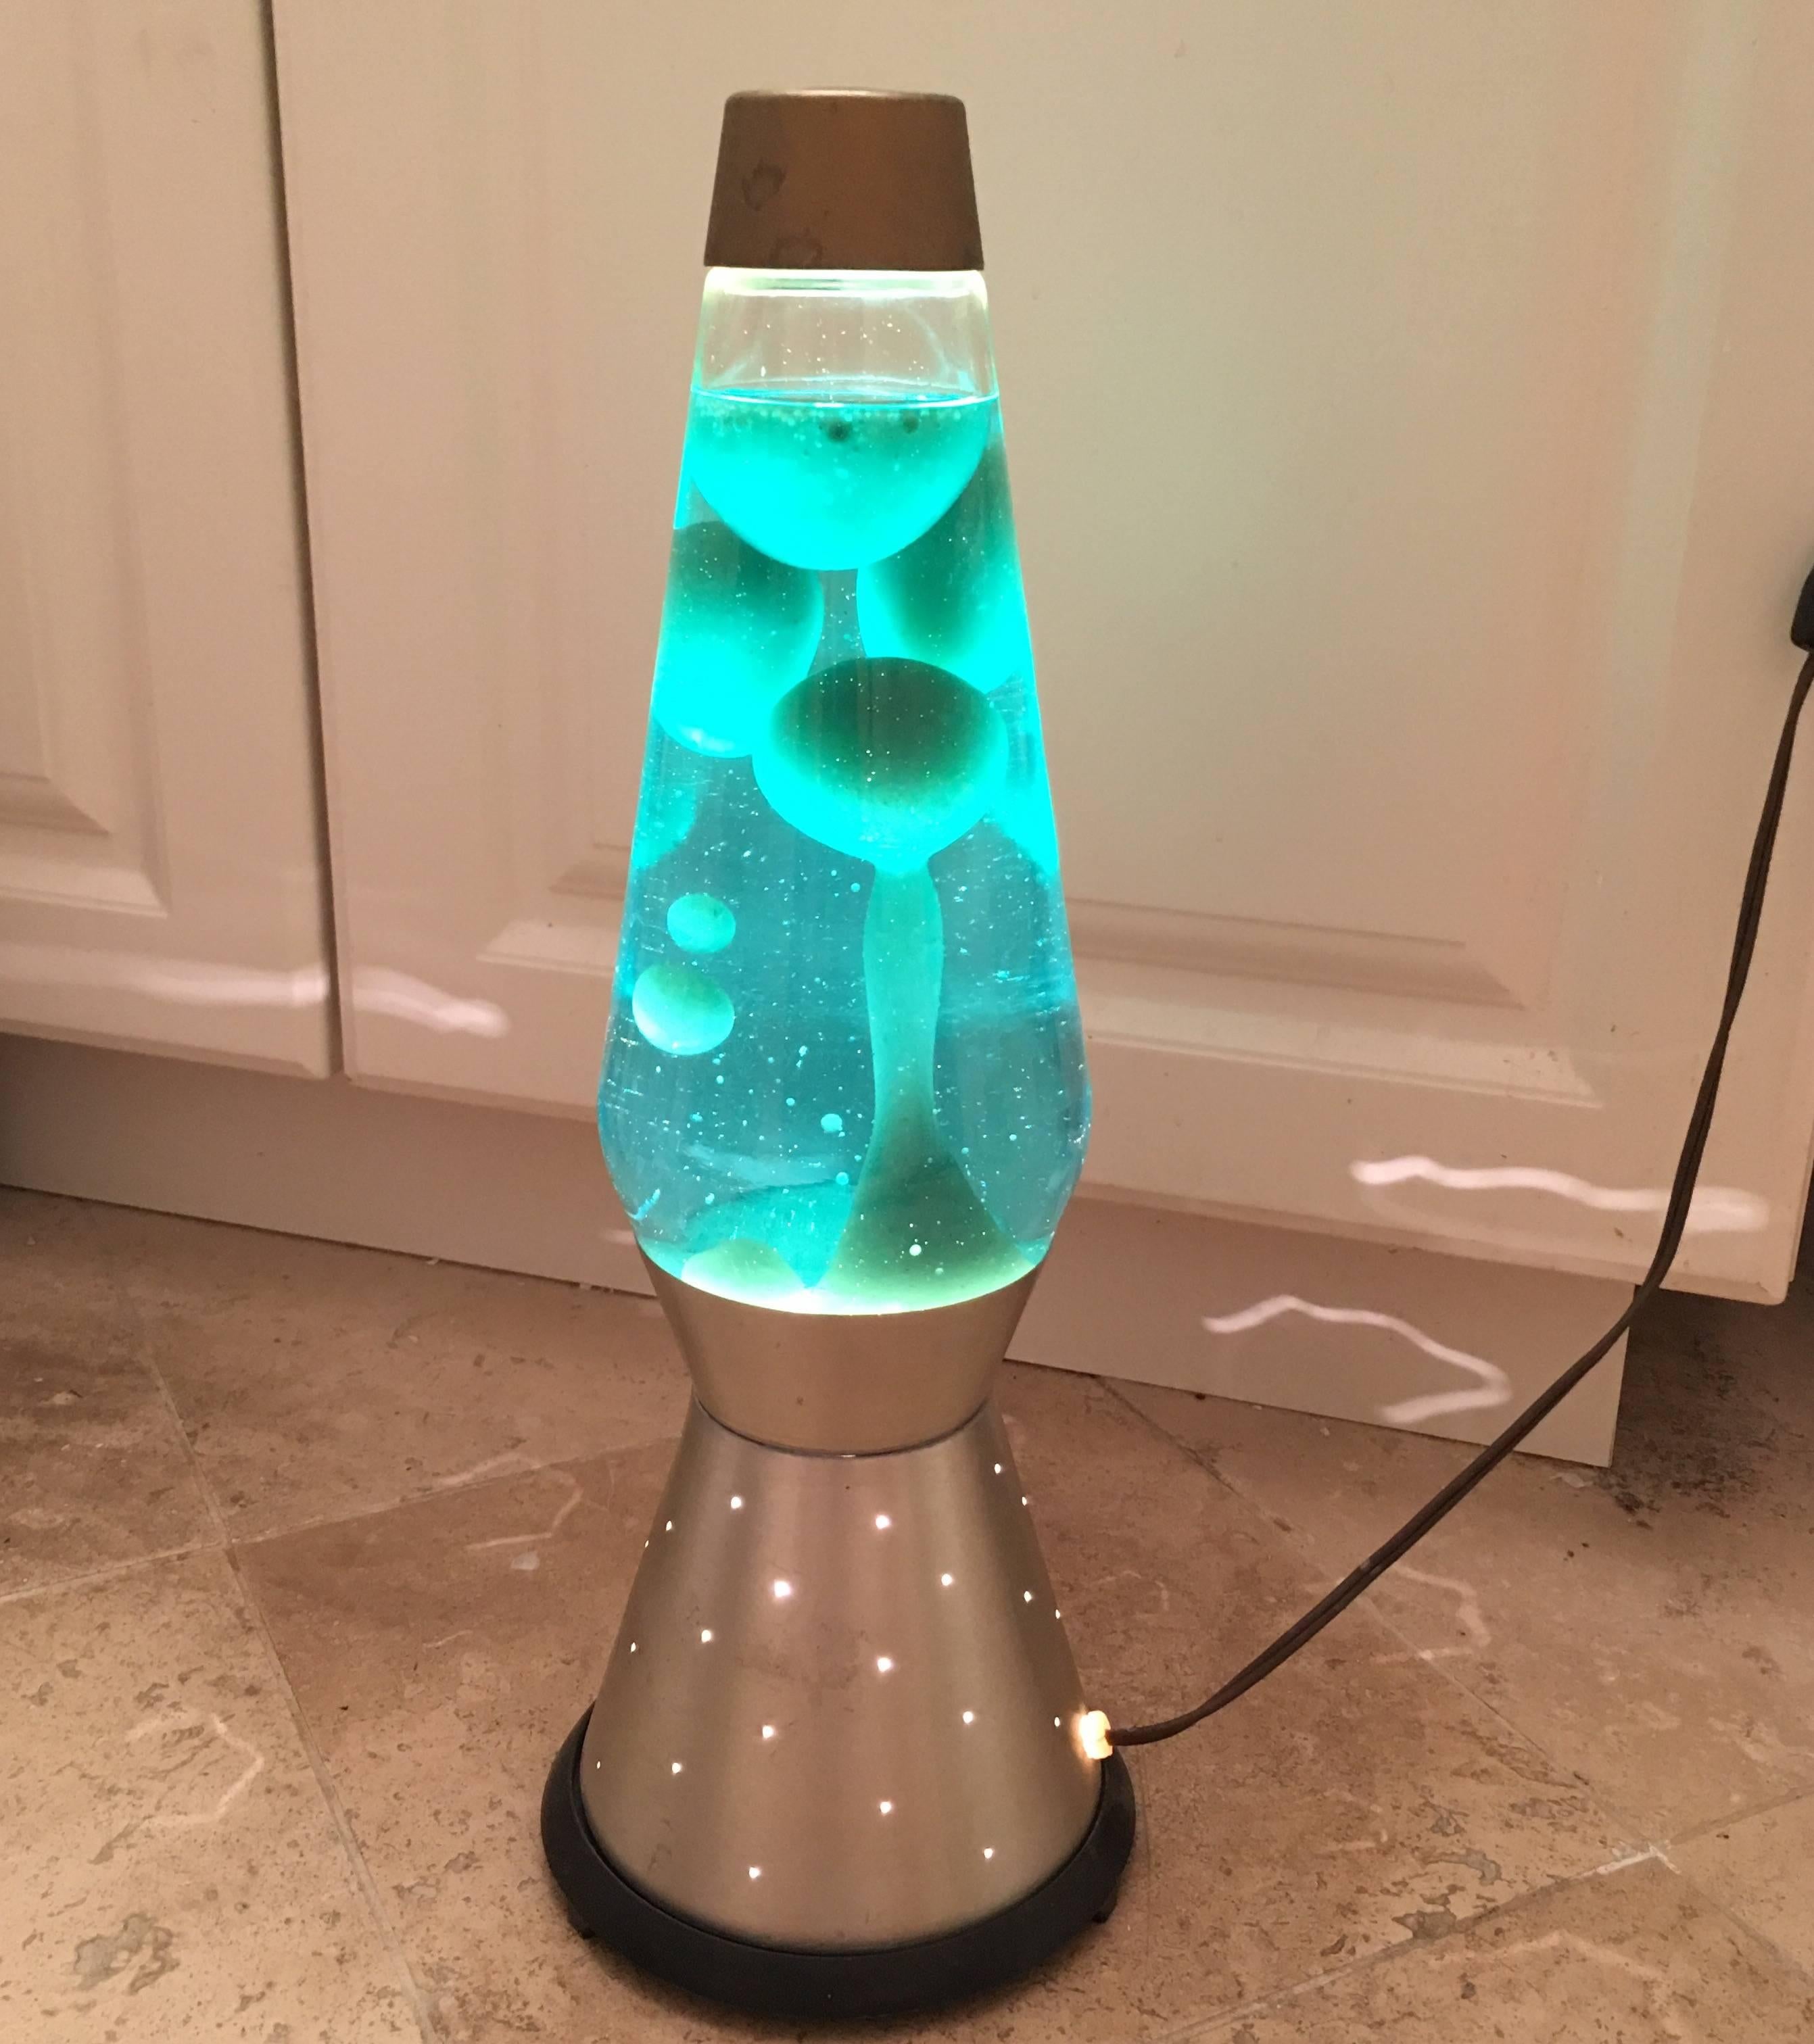 Terrific vintage Lava lamp by the Lava Symplex Company, 1970s. The lamp is comprised of blue liquid with white lava and Metal base. When lit the lava moves around and shadows are cast through the holes on the base. Truly a great mood light for your